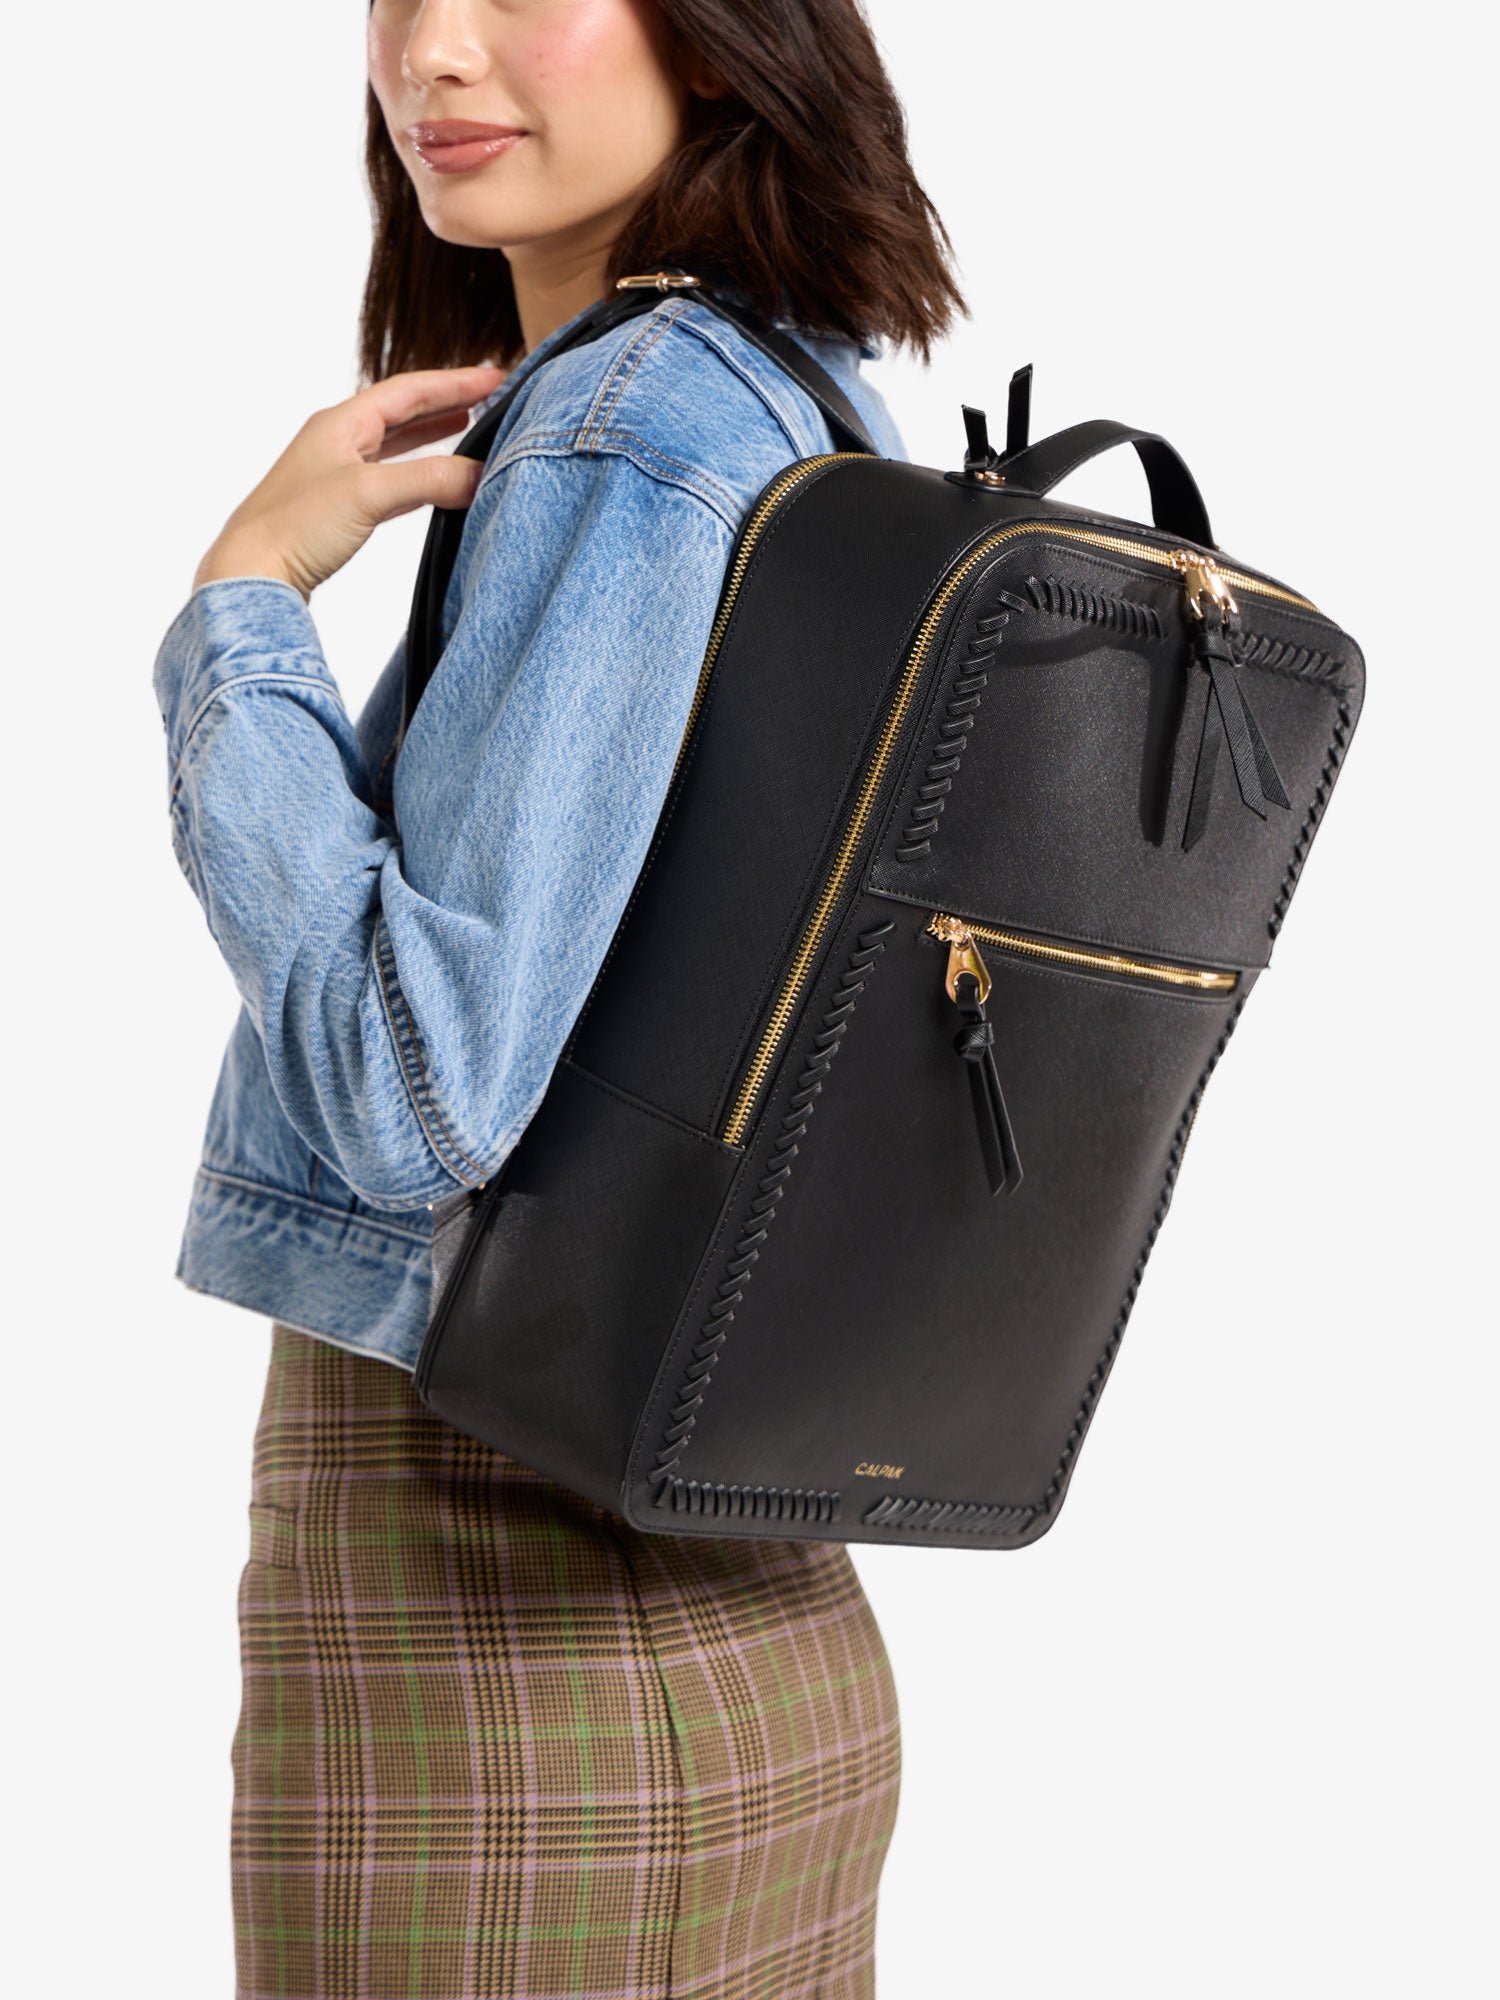 Model wearing CALPAK Kaya 17 inch Laptop Backpack in black with gold accents